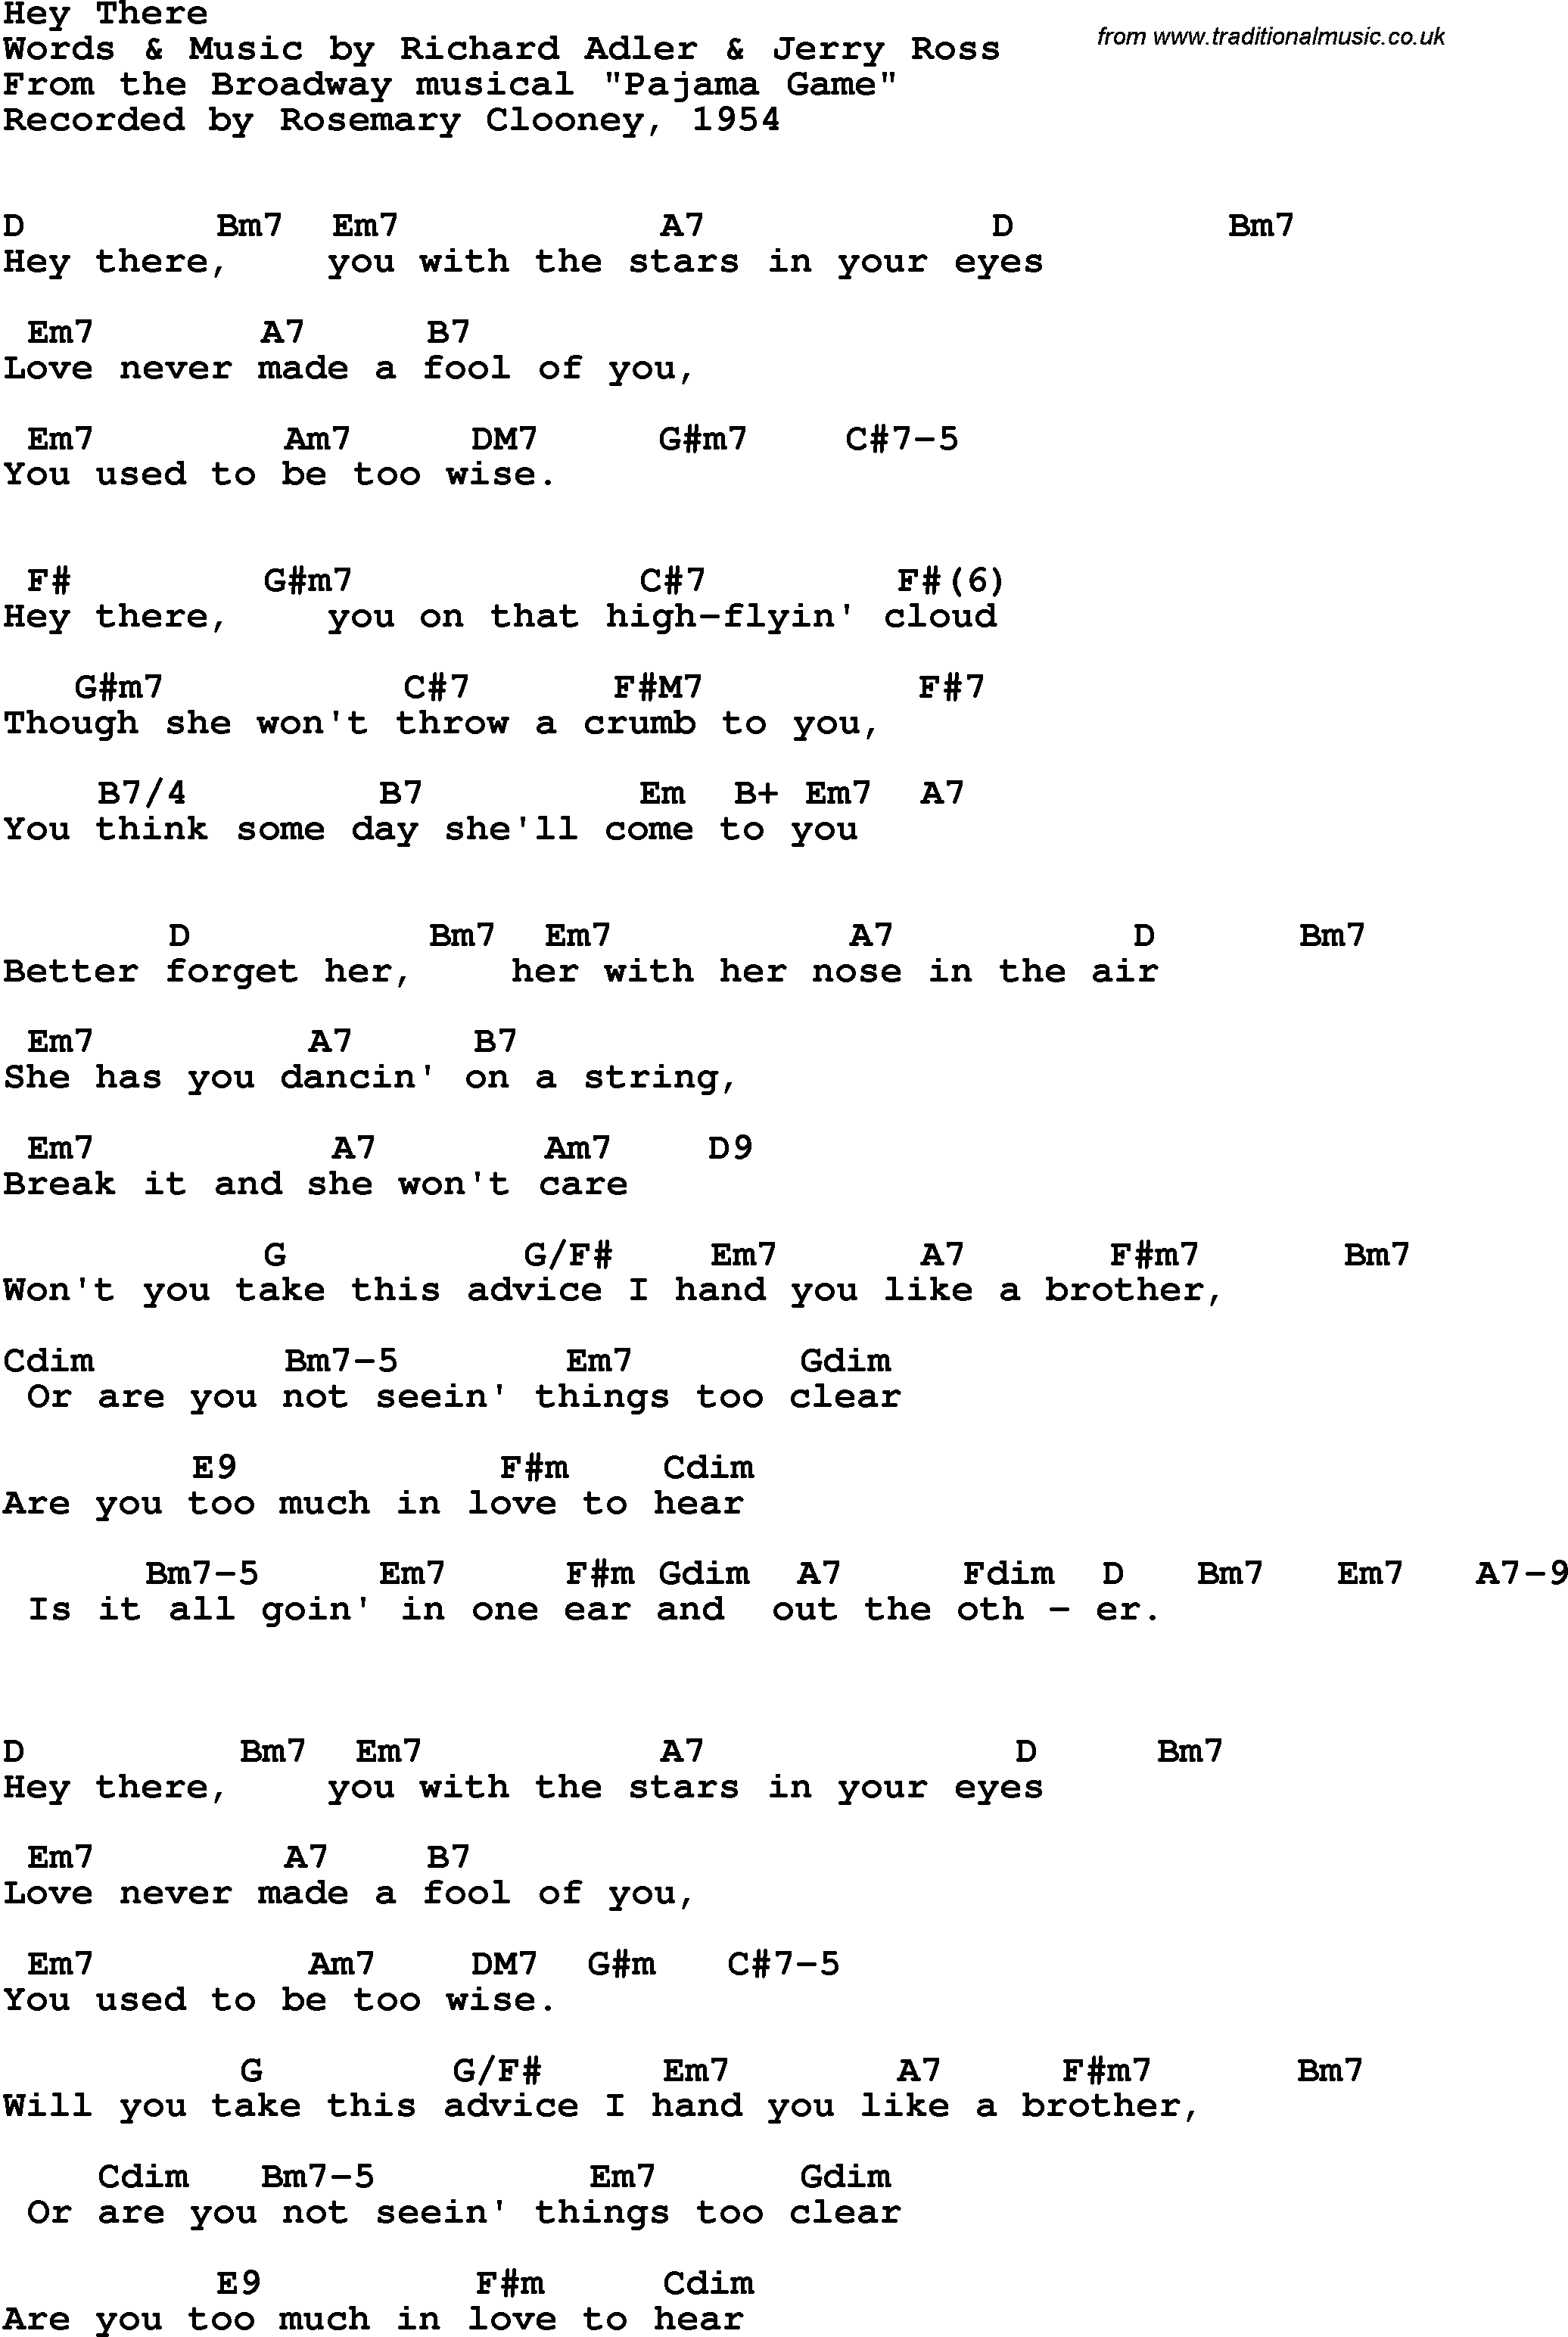 Song Lyrics with guitar chords for Hey There - Rosemary Clooney, 1954